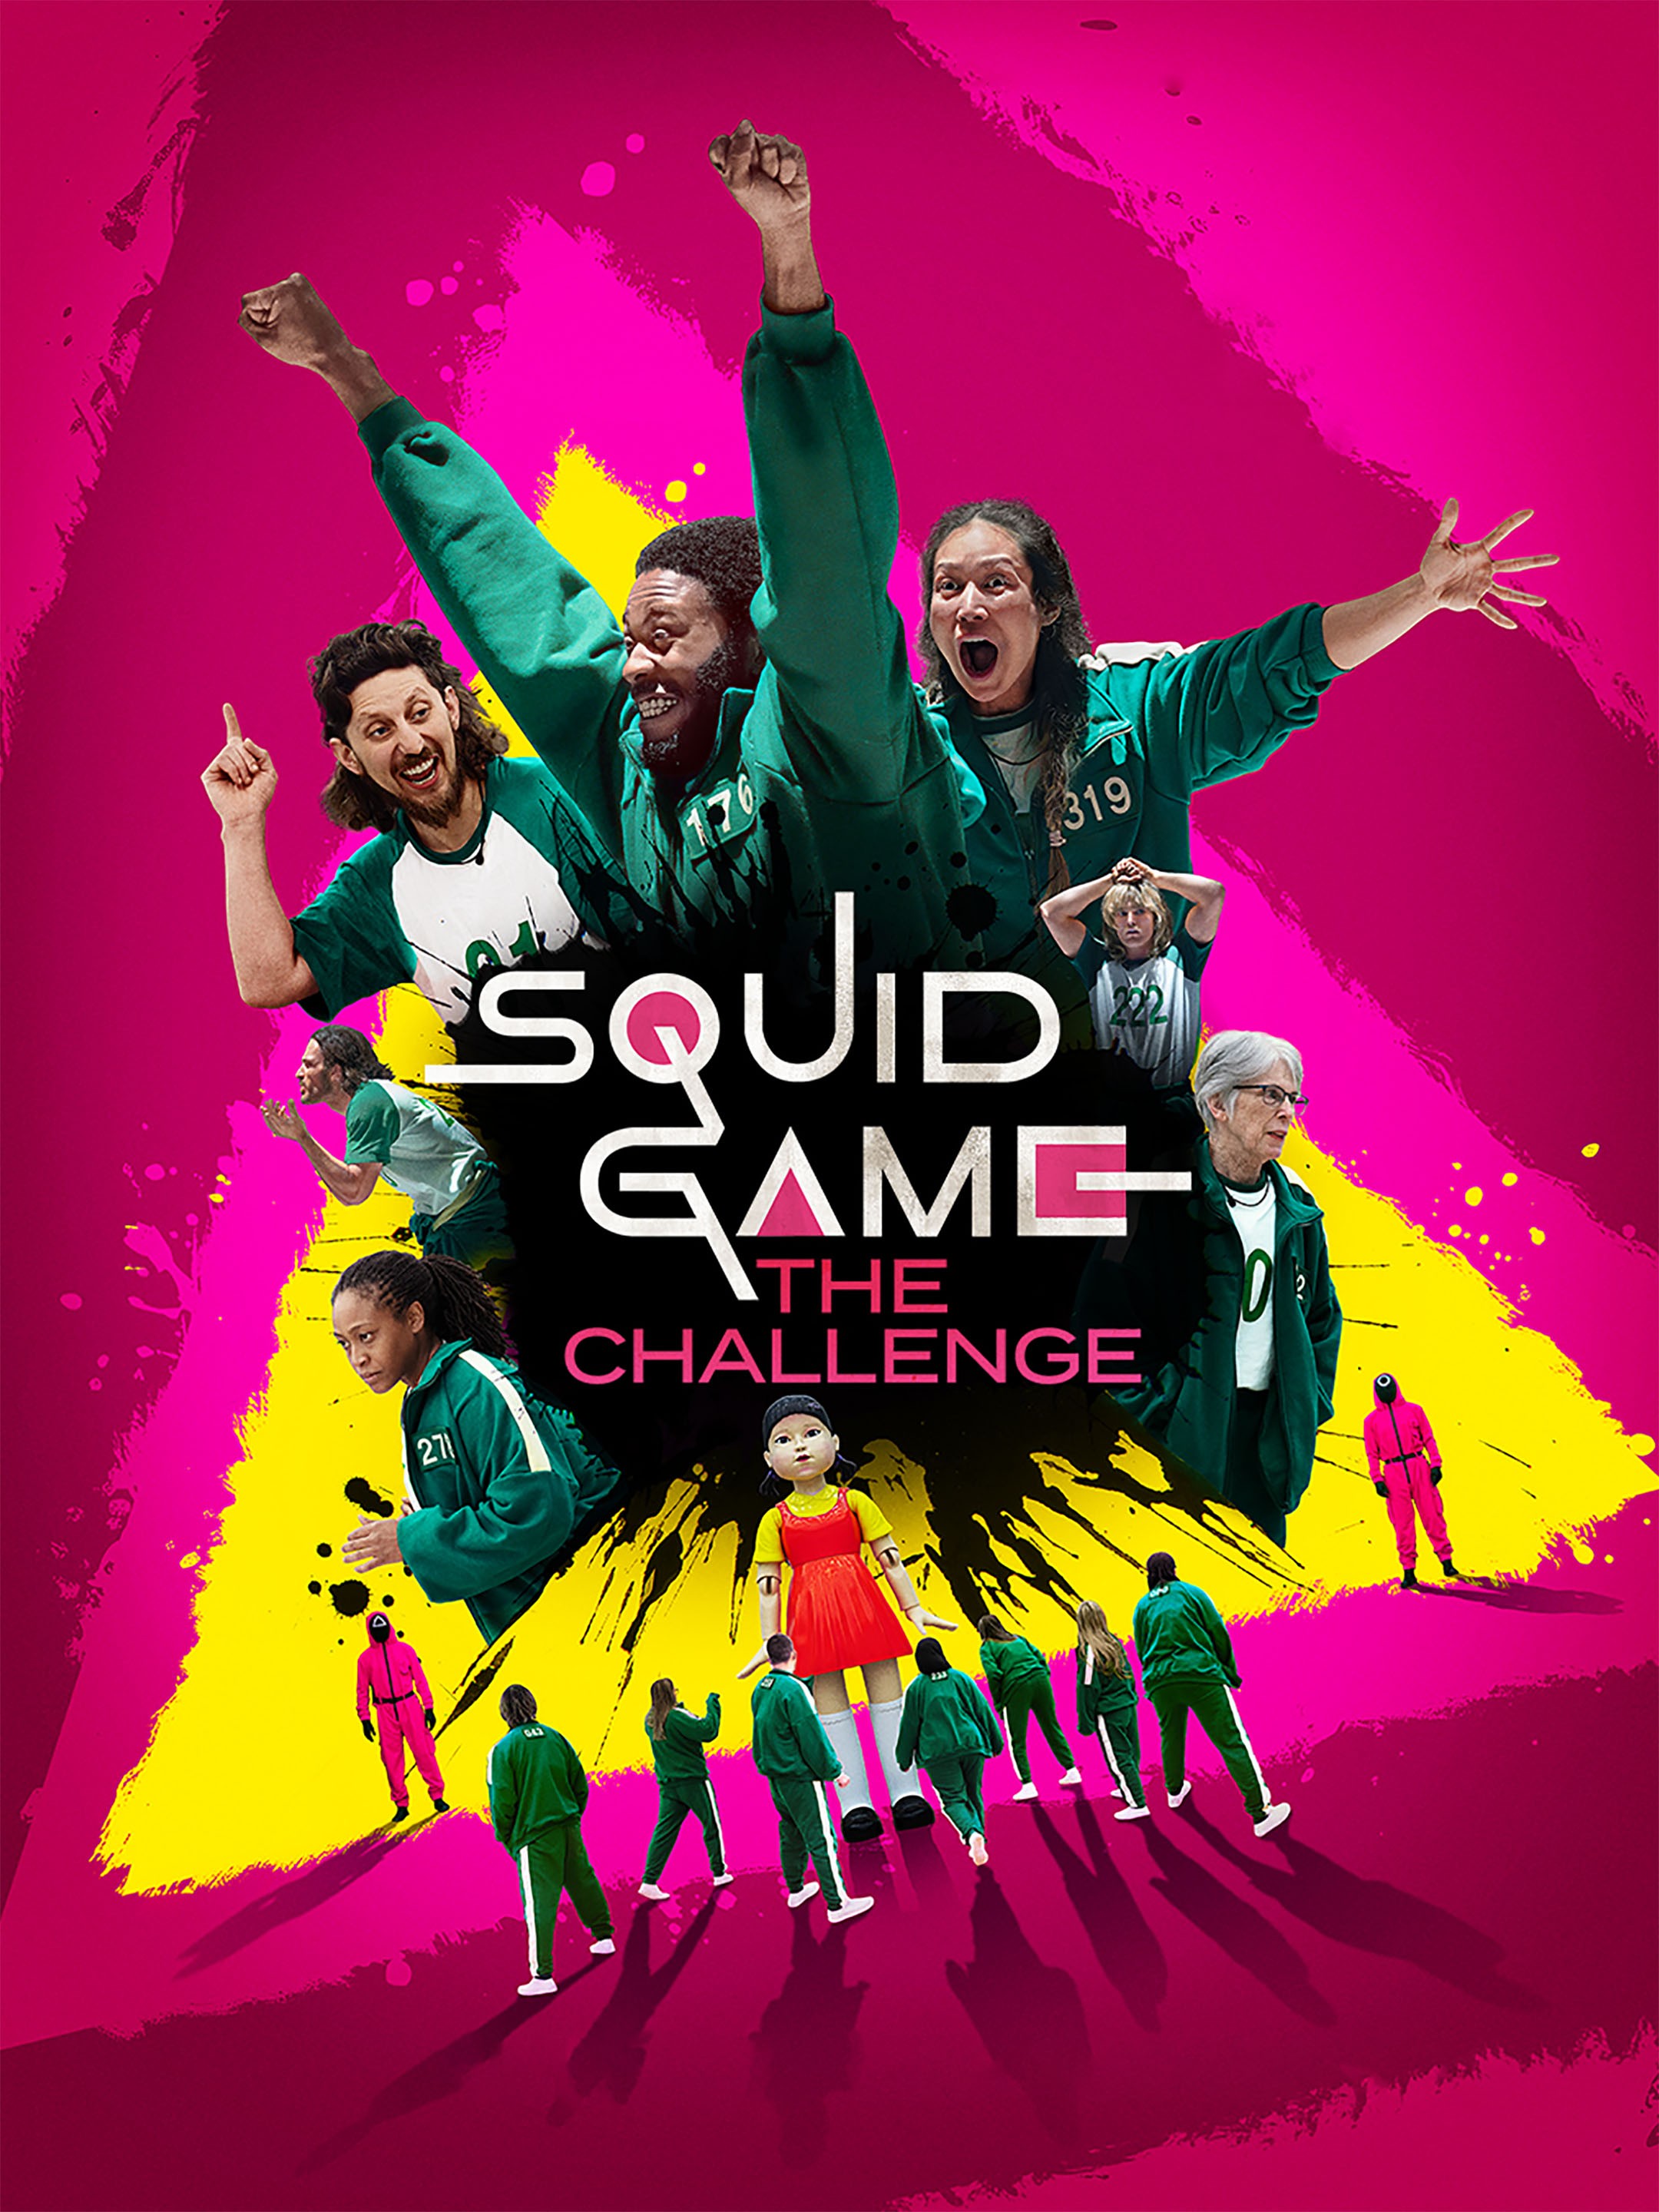 Squid Game: The Challenge Renewed for Season 2 Casting Open at Netflix